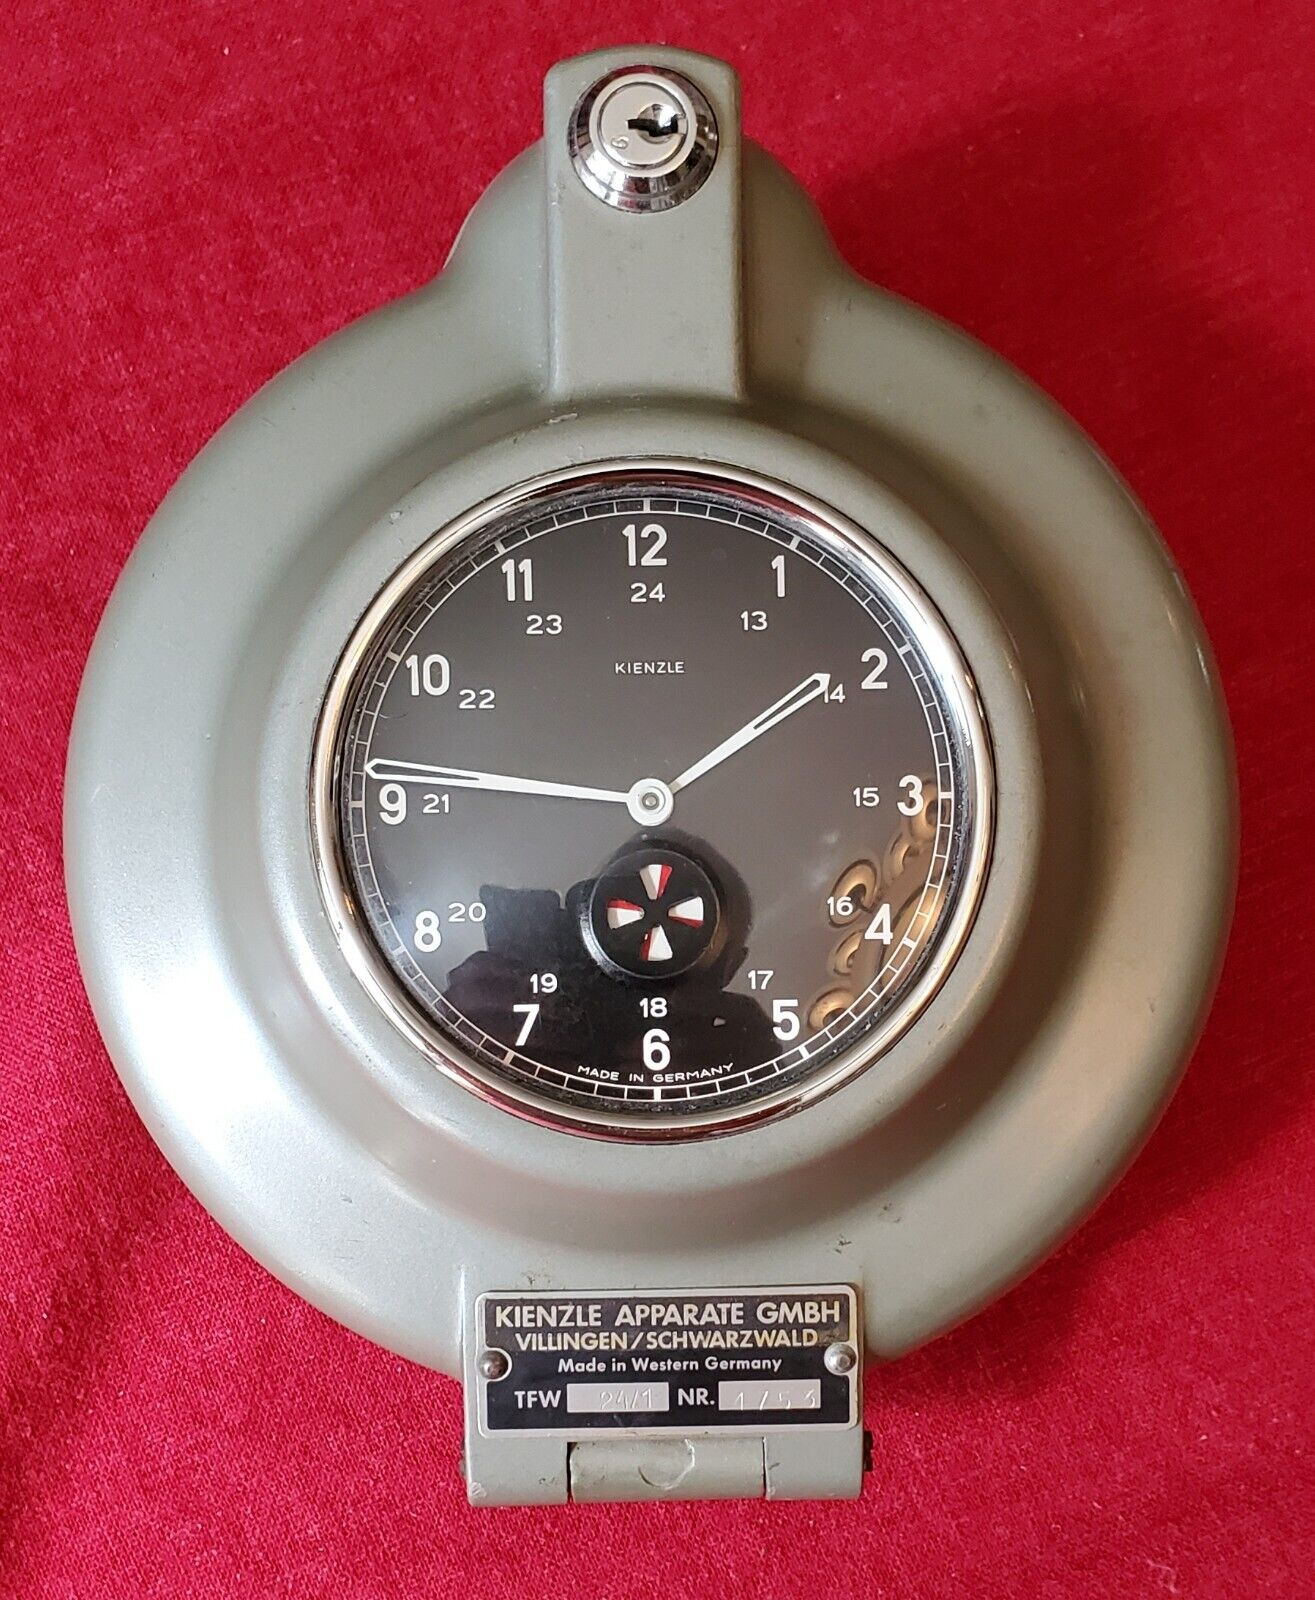 Vintage West German Kienzle Apparate Gmbh Car And Plane Clock And Tachograph